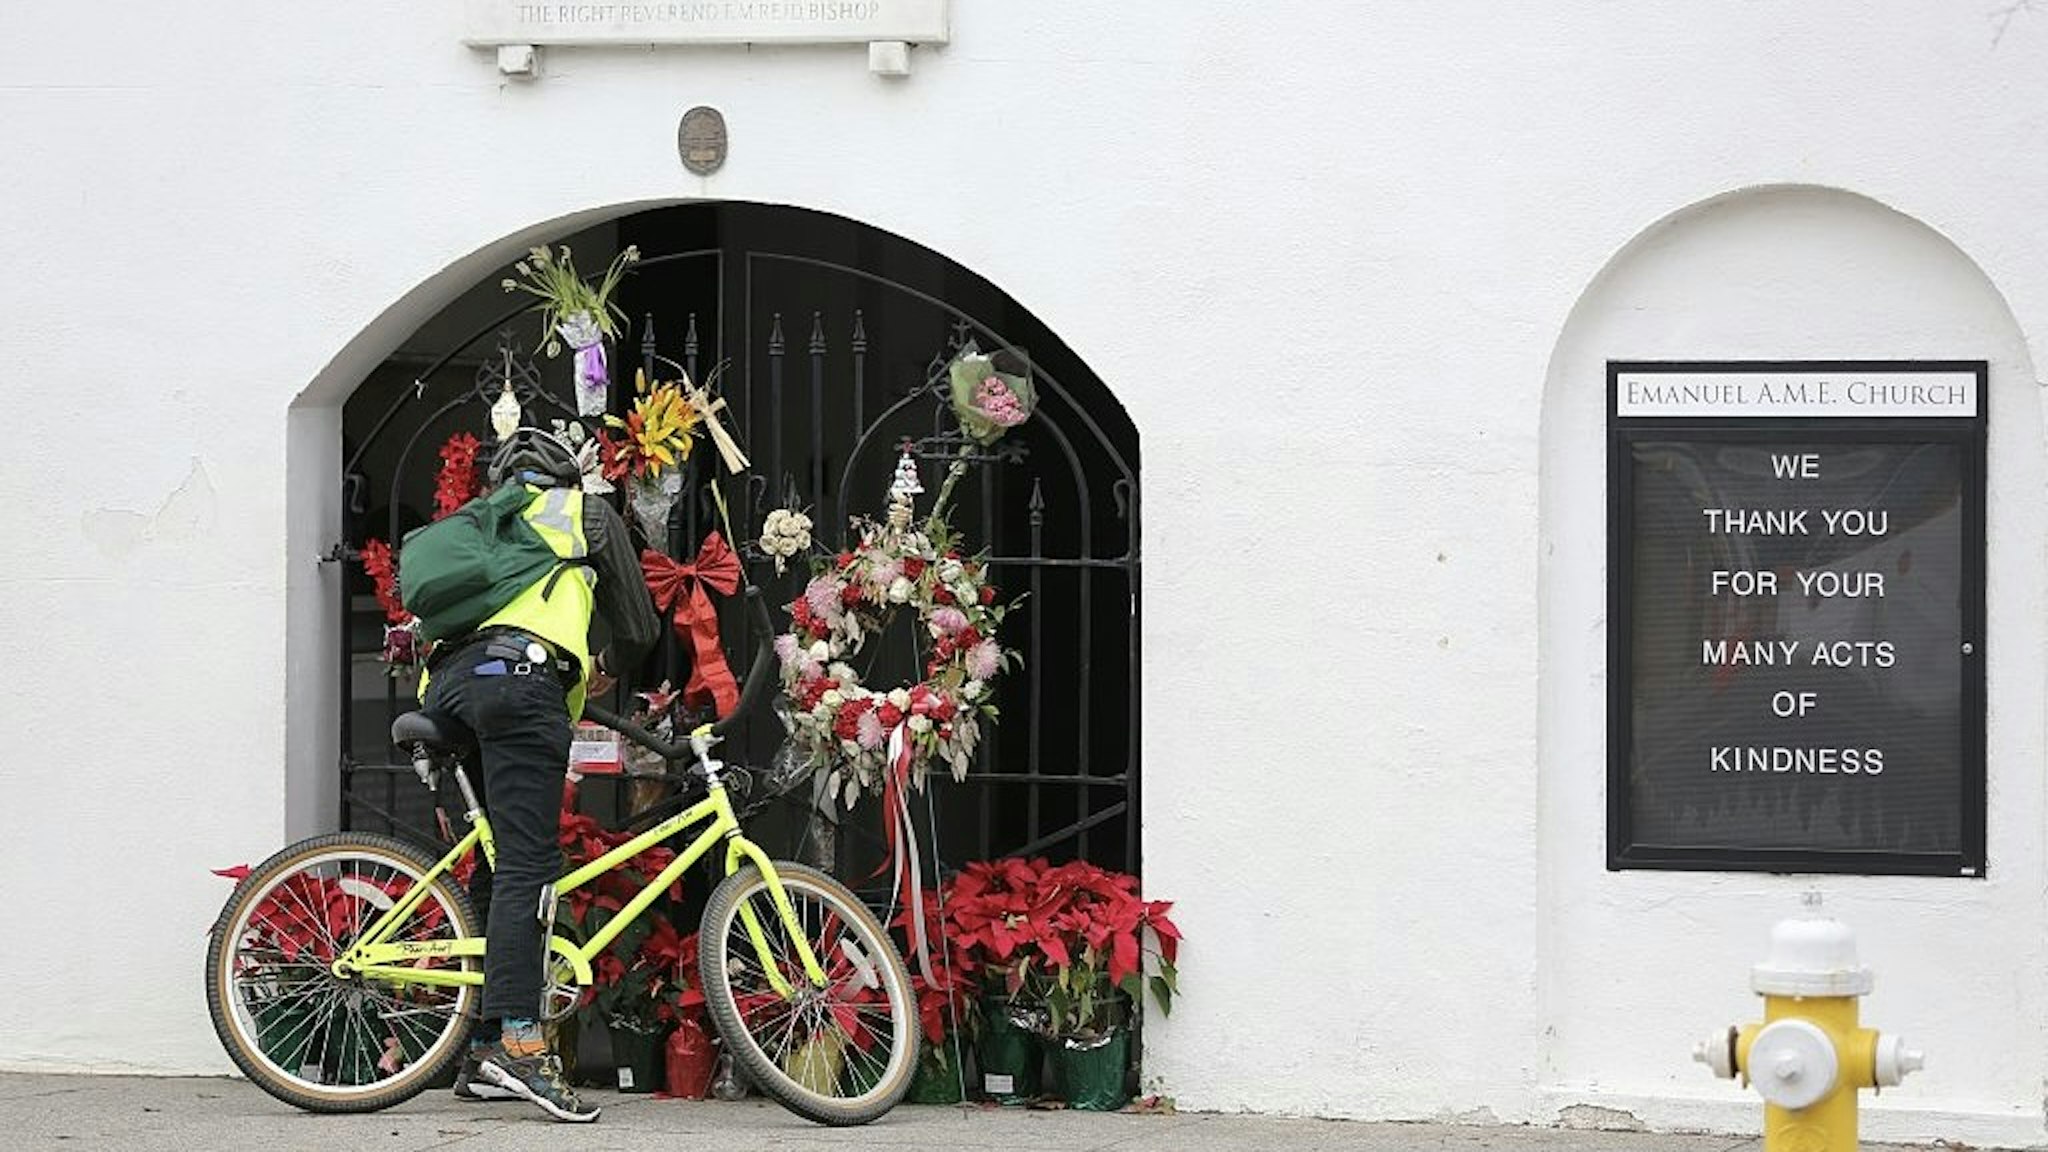 US-CRIME-MURDER-RACISM-COURT A man stops to observe the makeshift memorial in front of Mother Emanuel AME Church in downtown Charleston, South Carolina on January 4, 2017. Dylann Roof, the self-described white supremacist who gunned down nine black churchgoers in a Charleston church, offered no apology or motive for his actions as a jury began considering whether to sentence him to death. / AFP / Logan Cyrus (Photo credit should read LOGAN CYRUS/AFP via Getty Images) LOGAN CYRUS / Stringer